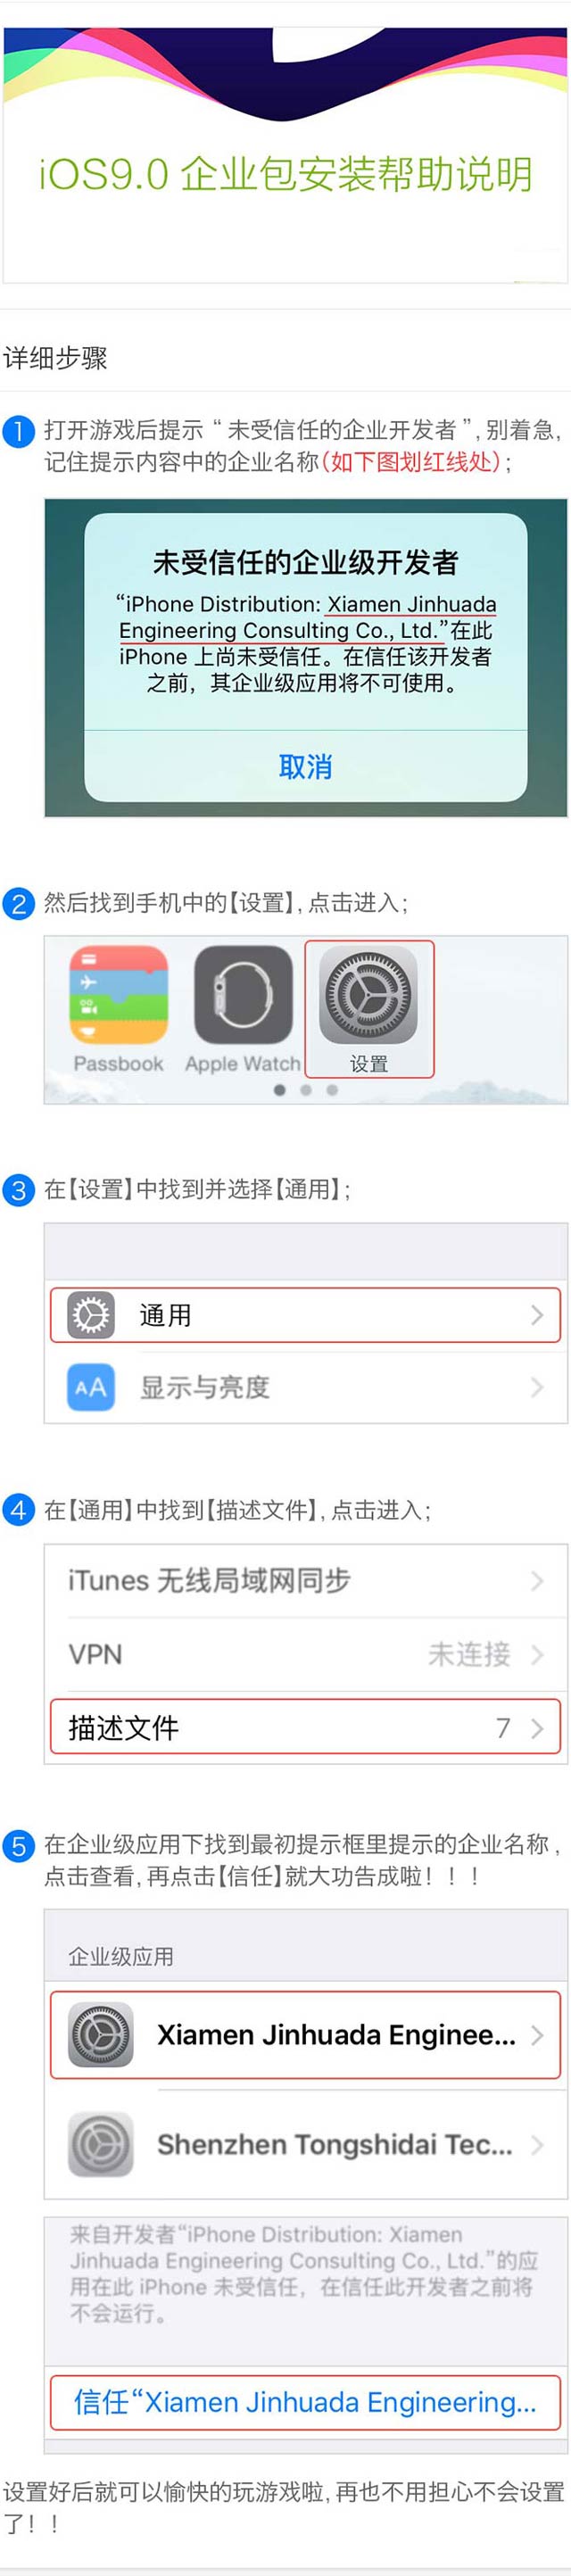 <strong>pc2.8开奖网记录</strong>，<strong>pc2.8开奖网记录</strong>，“<strong>pc2.8开奖网记录</strong>”<strong>pc2.8开奖网记录</strong>